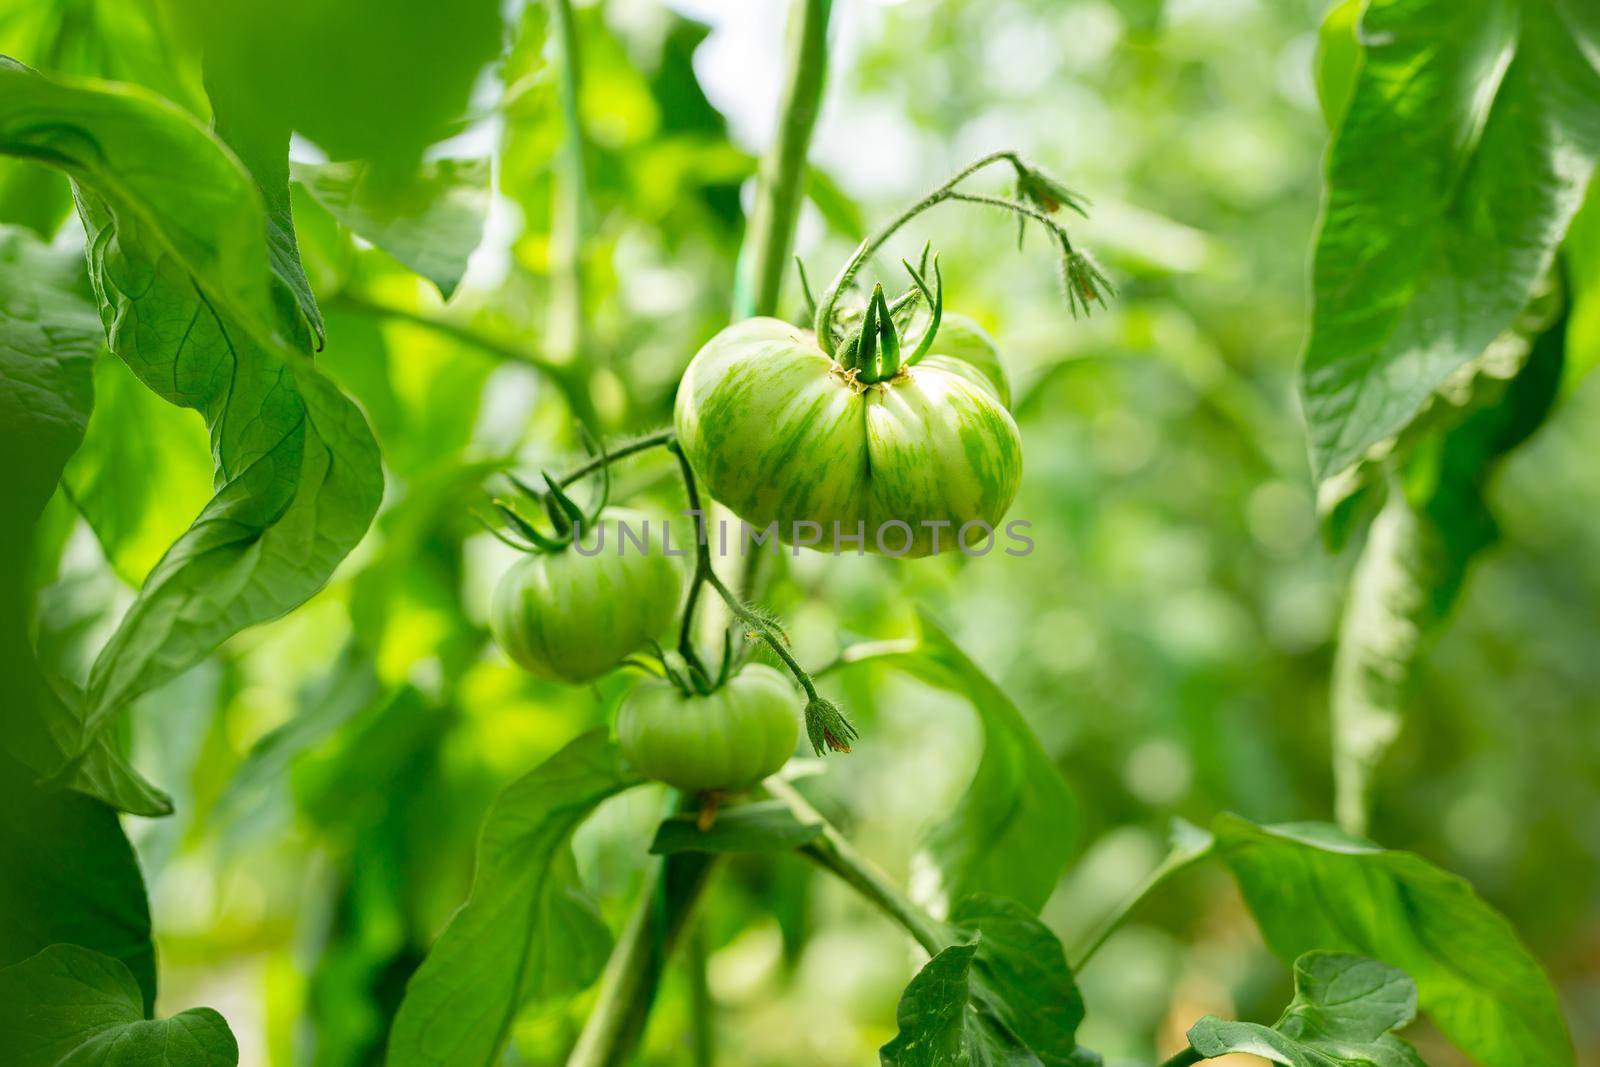 Ripening unripe green tomatoes growing on a garden bed.